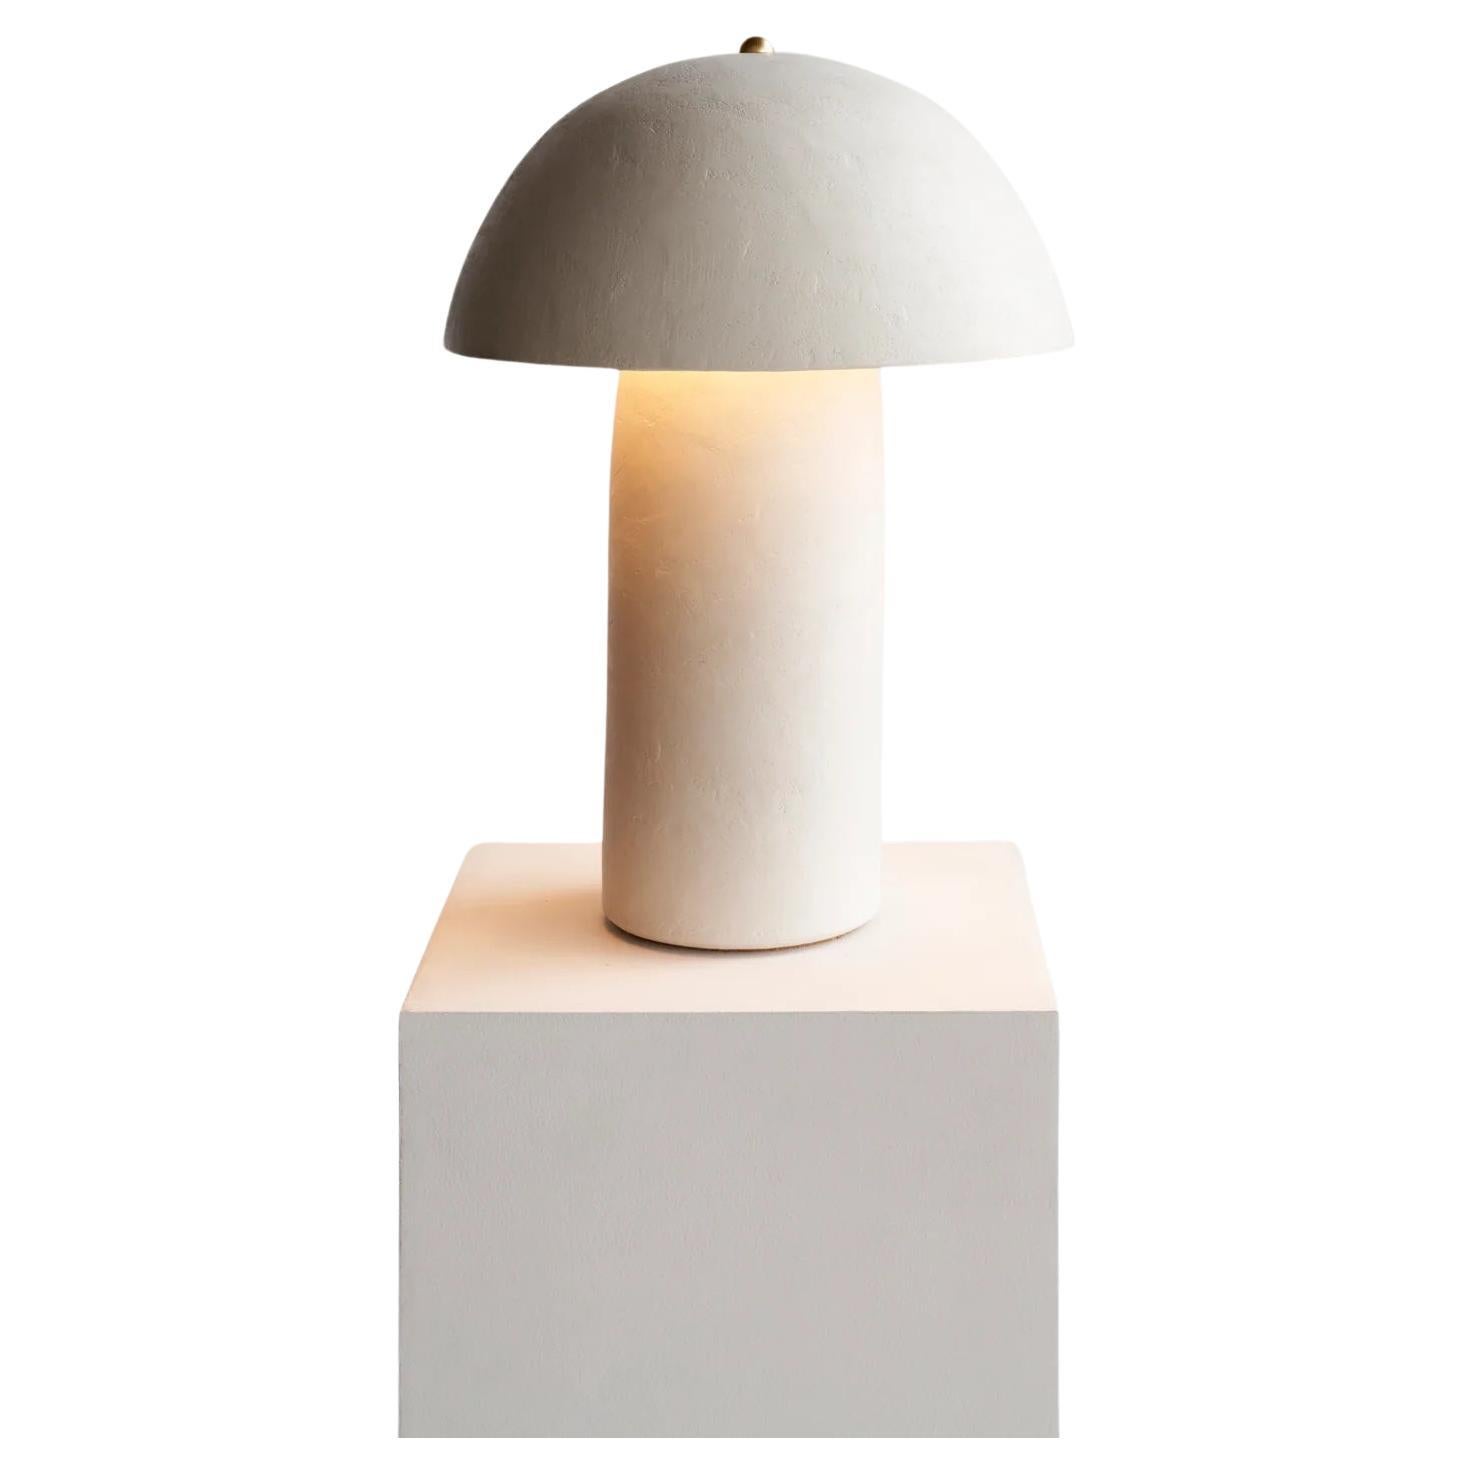 Large Tera Lamp in White Lime Plaster by Ceramicah For Sale